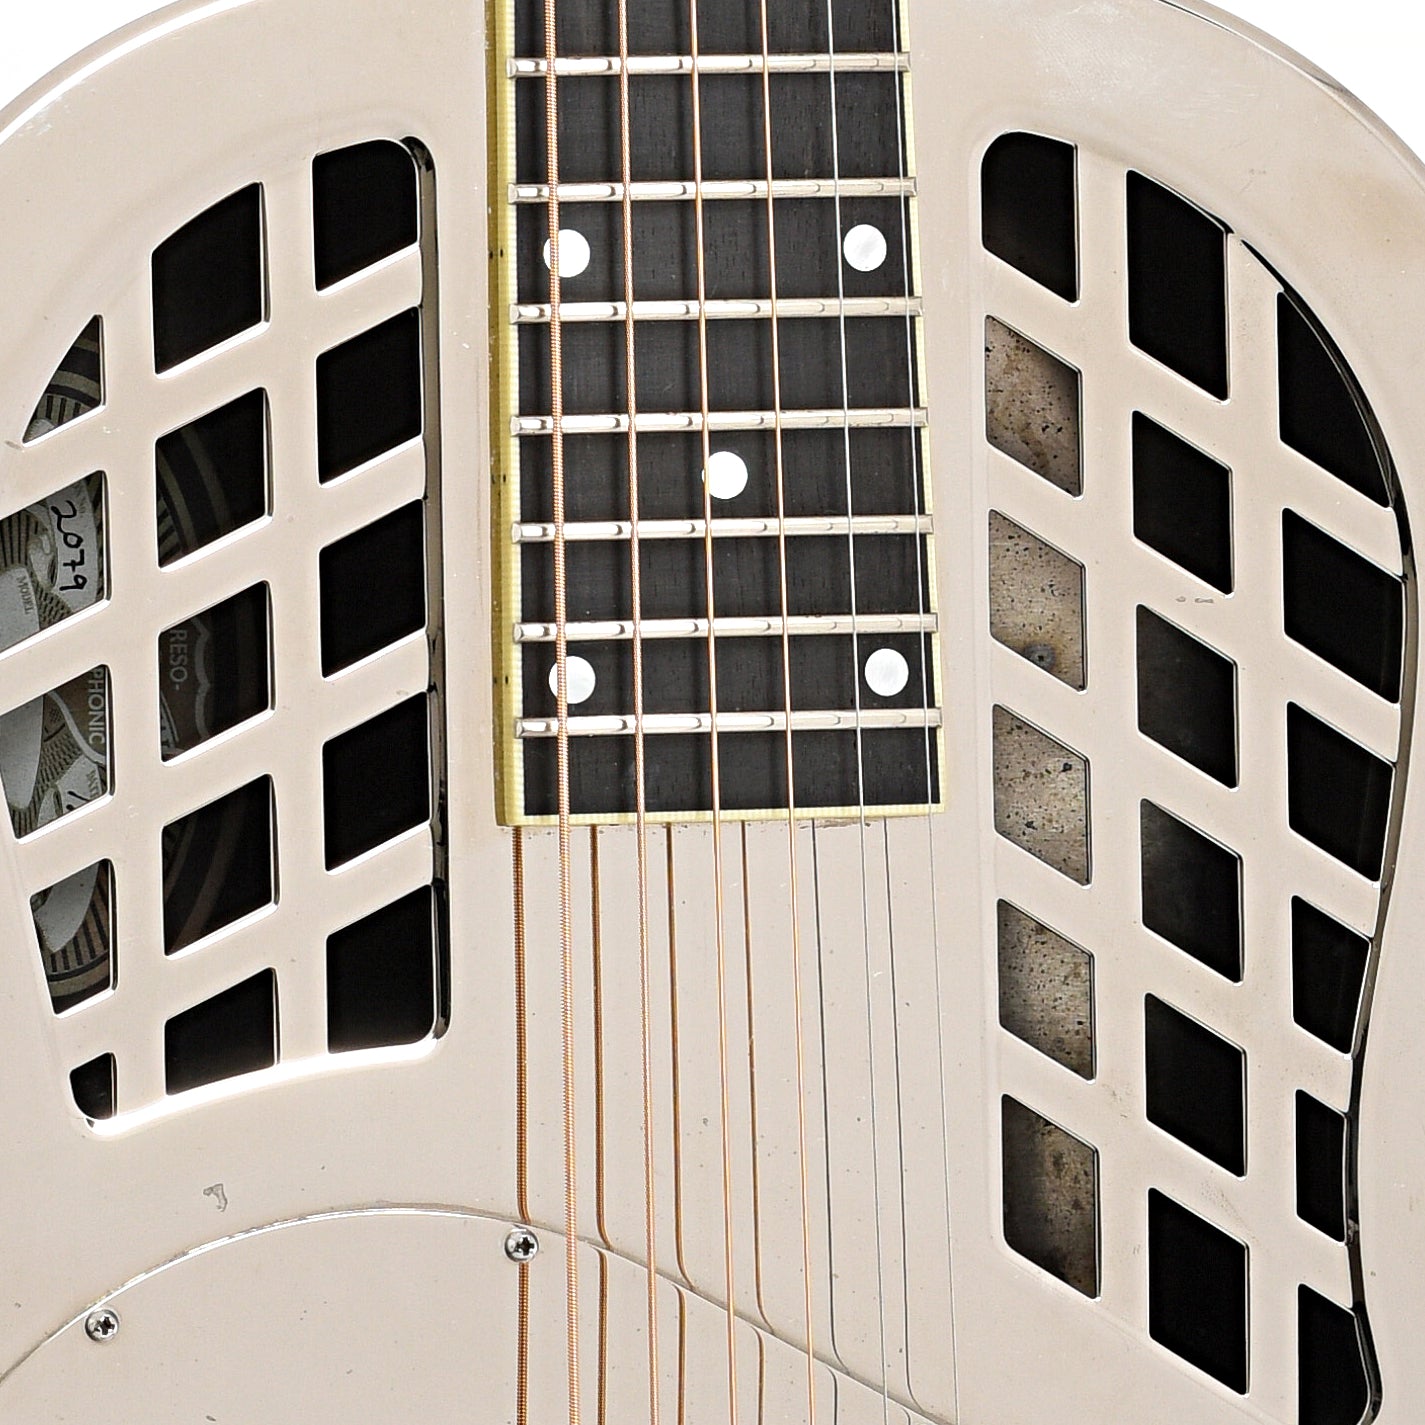 Sound holes of National German Silver Style 1 Tricone Resonator Guitar (2013)